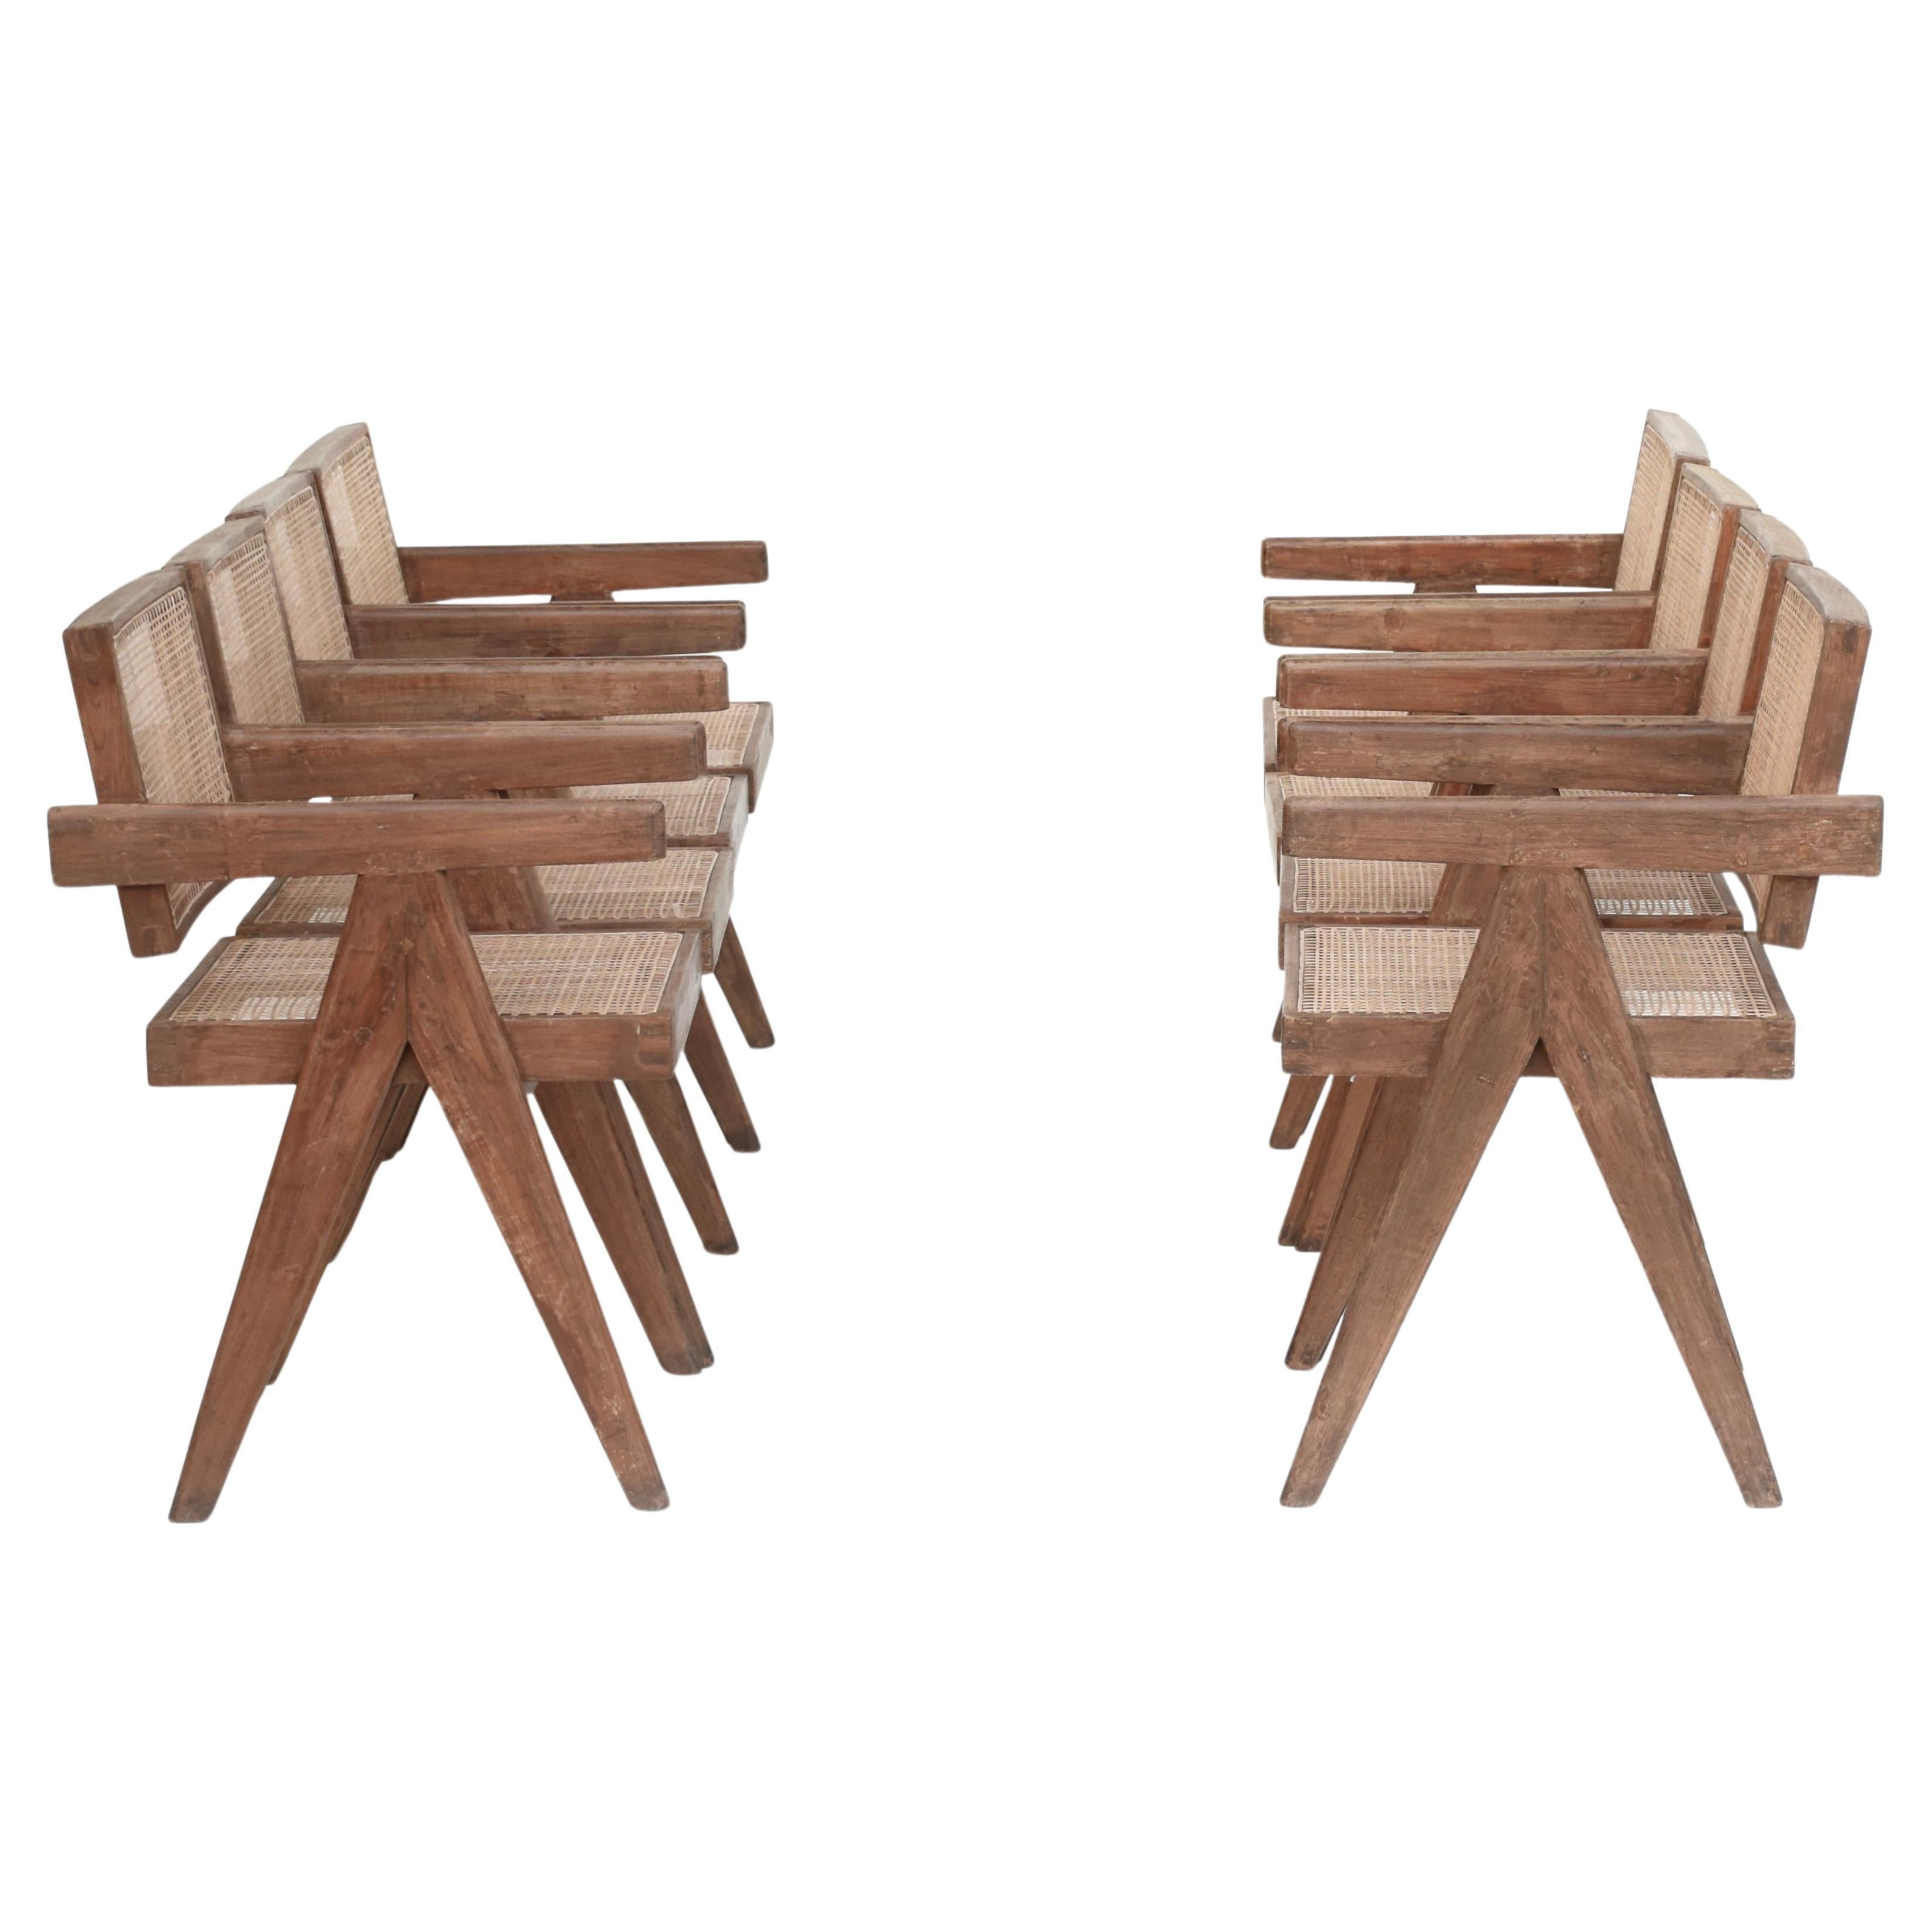 Pierre Jeanneret Set of 10 Floating Back Chairs Ca. 1960 from Chandigarh For Sale 5